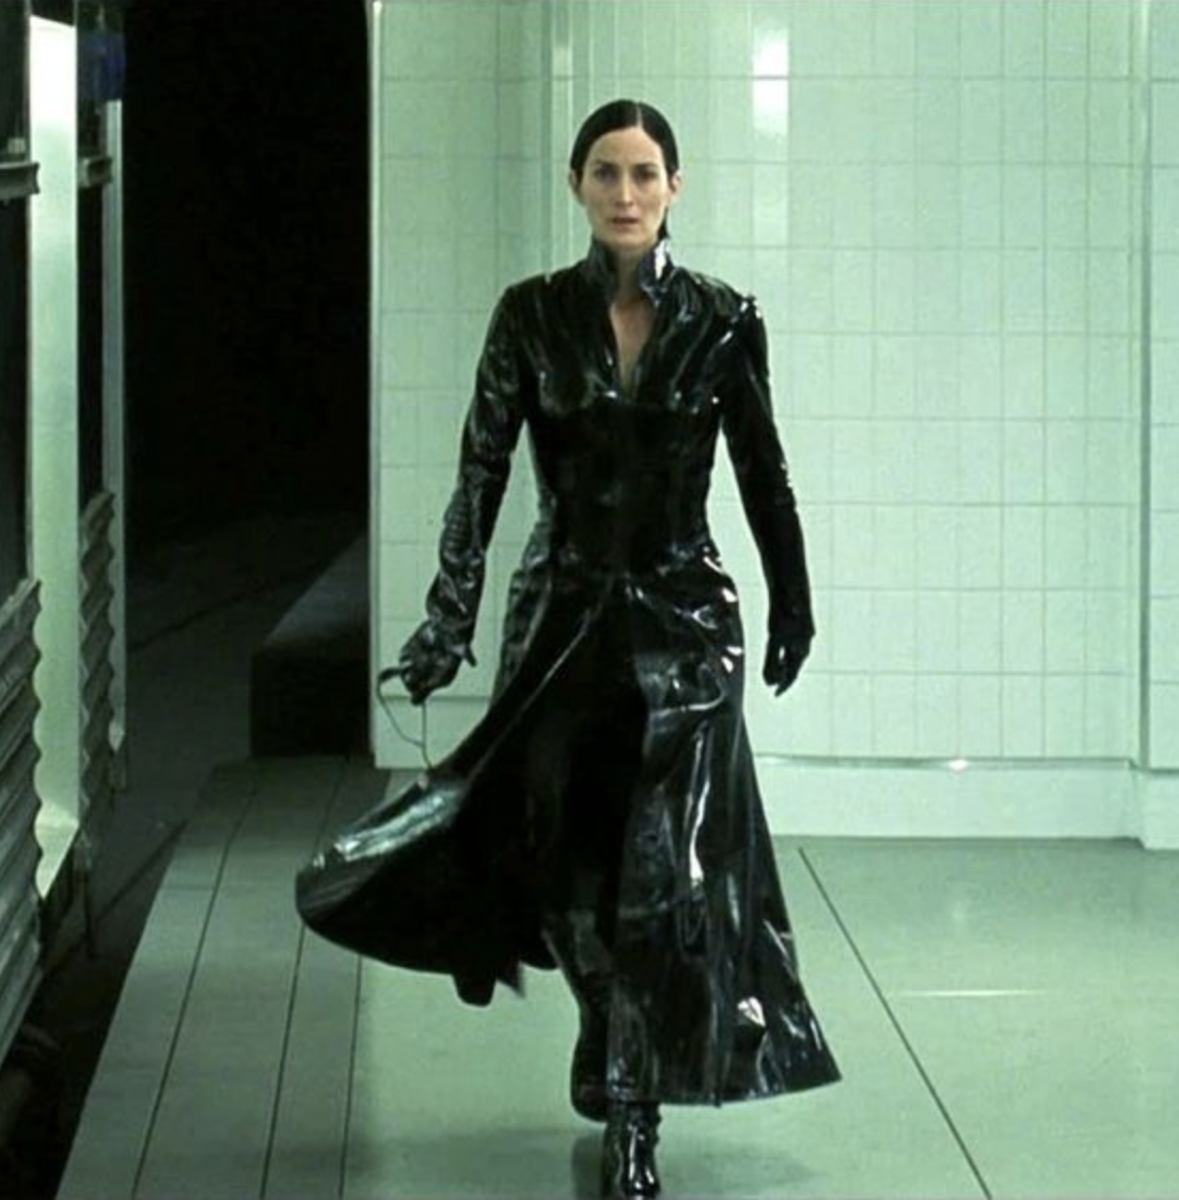 Carrie-Anne Moss as Trinity from The Matrix